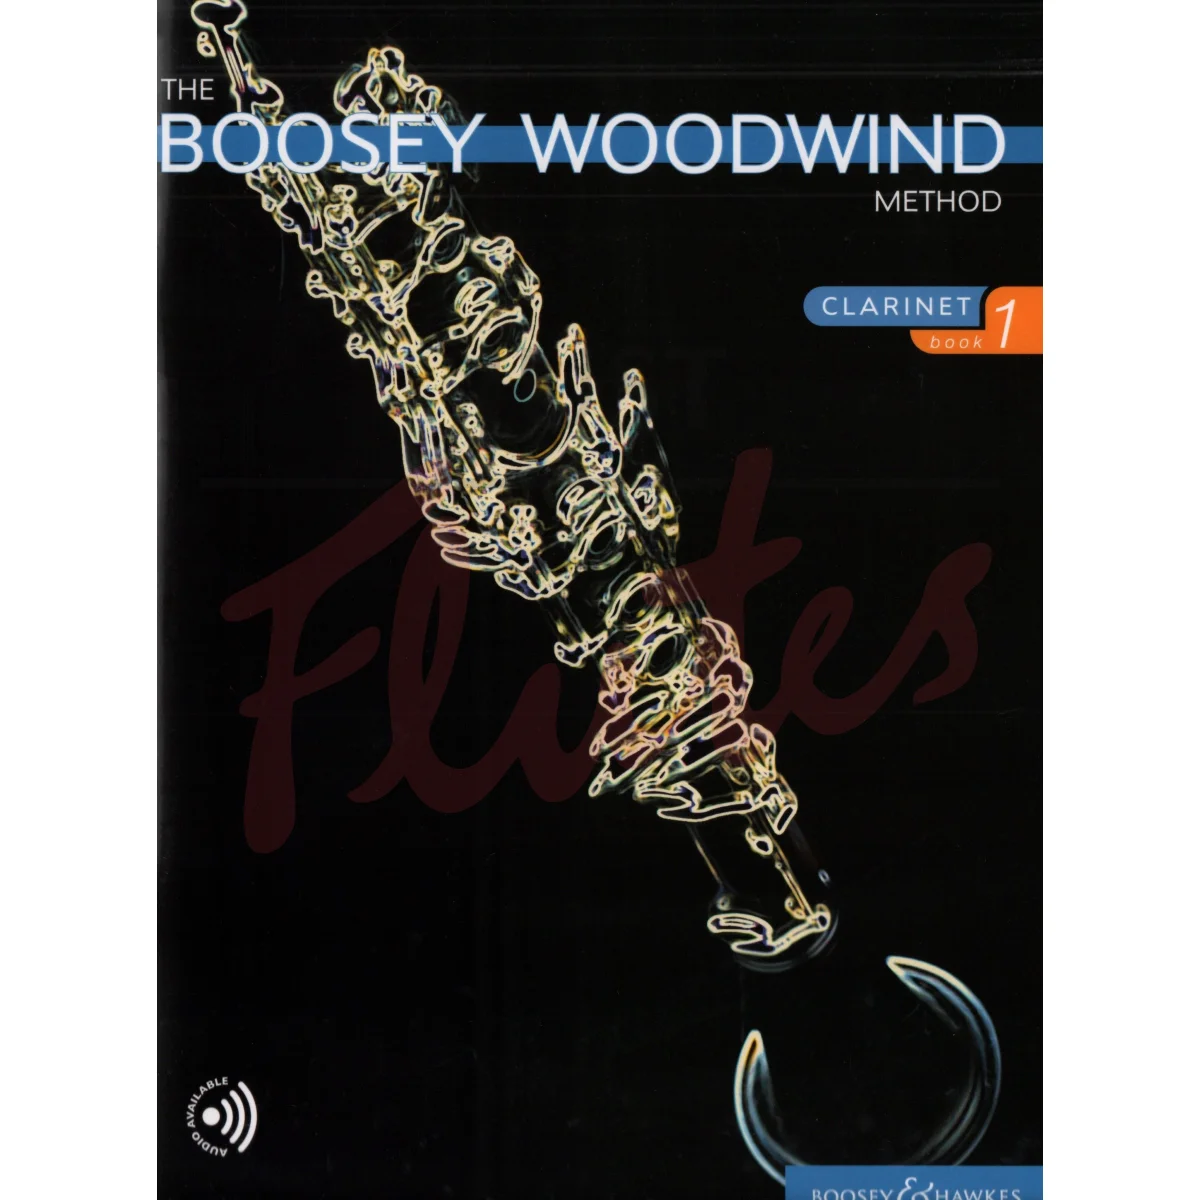 The Boosey Woodwind Method for Clarinet, Book 1